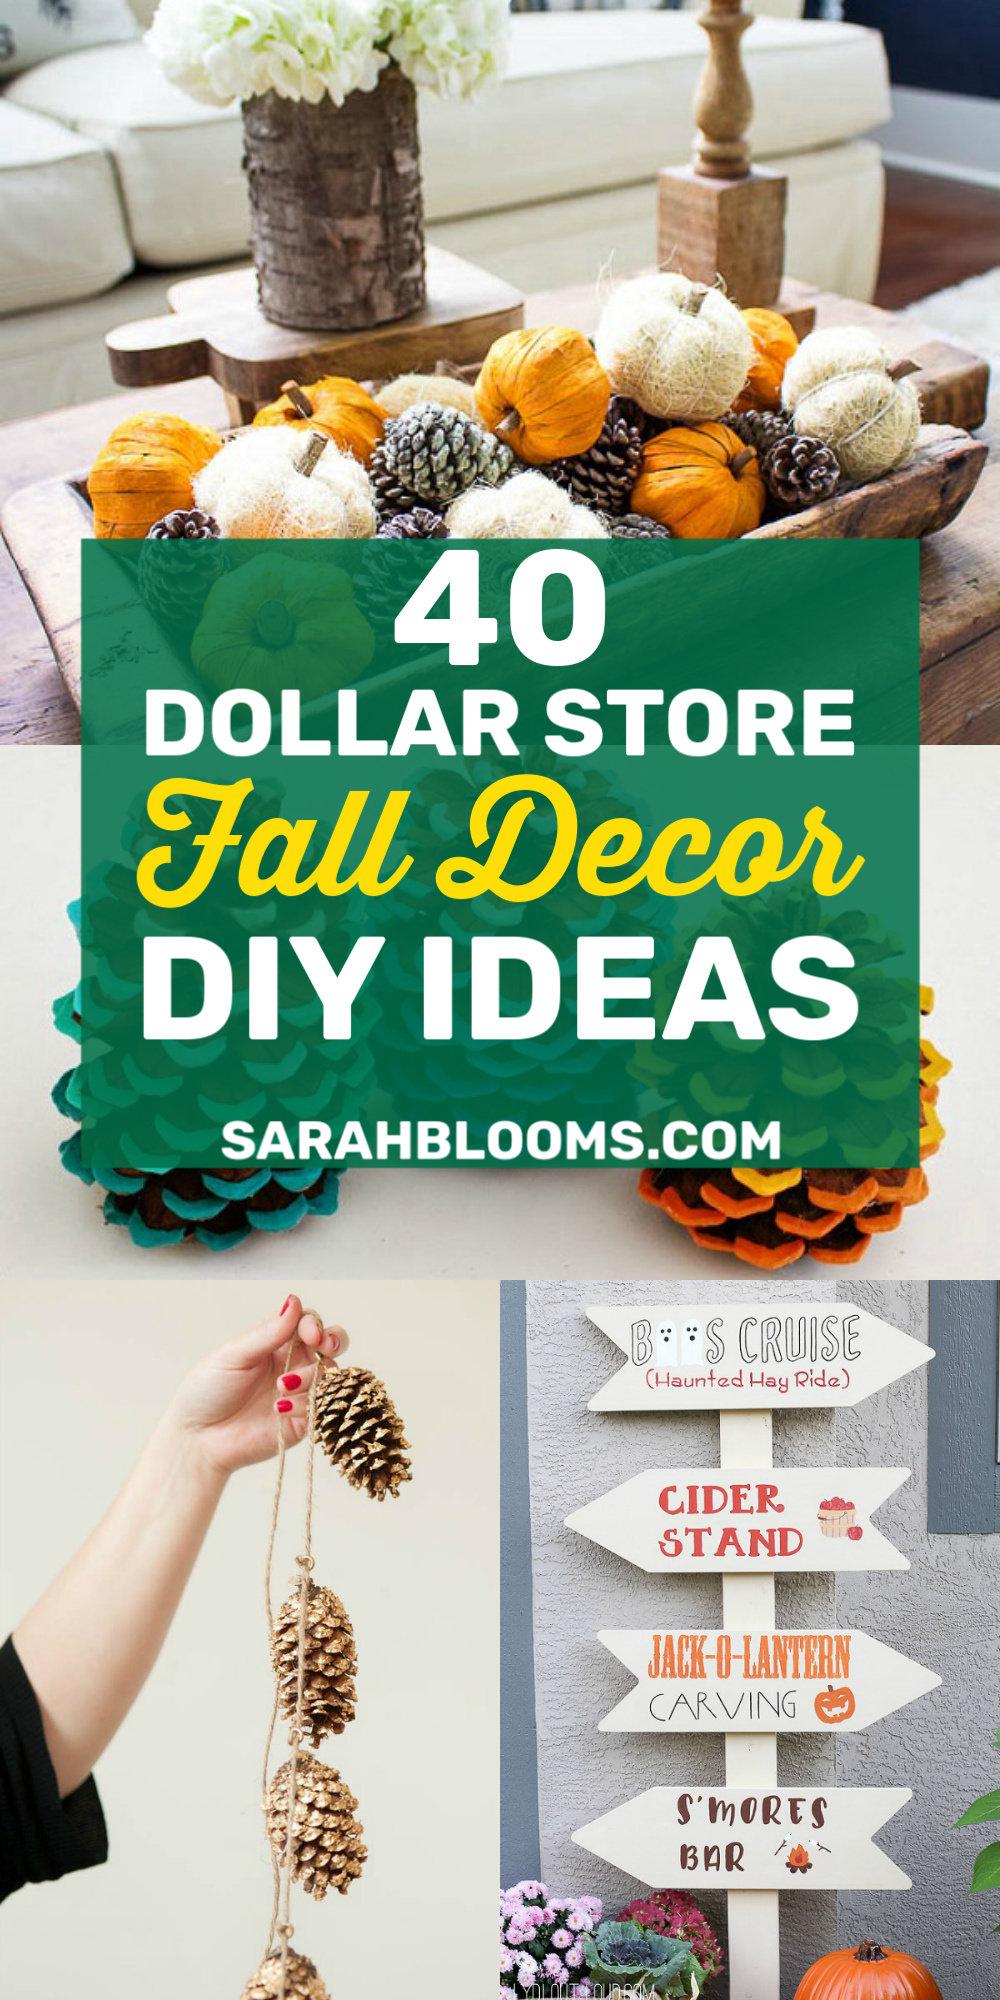 These 35 Must-See Dollar Store DIY Fall Décor Ideas will transform your home for autumn on a dime!  And they're super easy to make - even if you're not crafty! #dollarstore #dollarstoredecor #fall #falldecor #fallhome #SarahBlooms